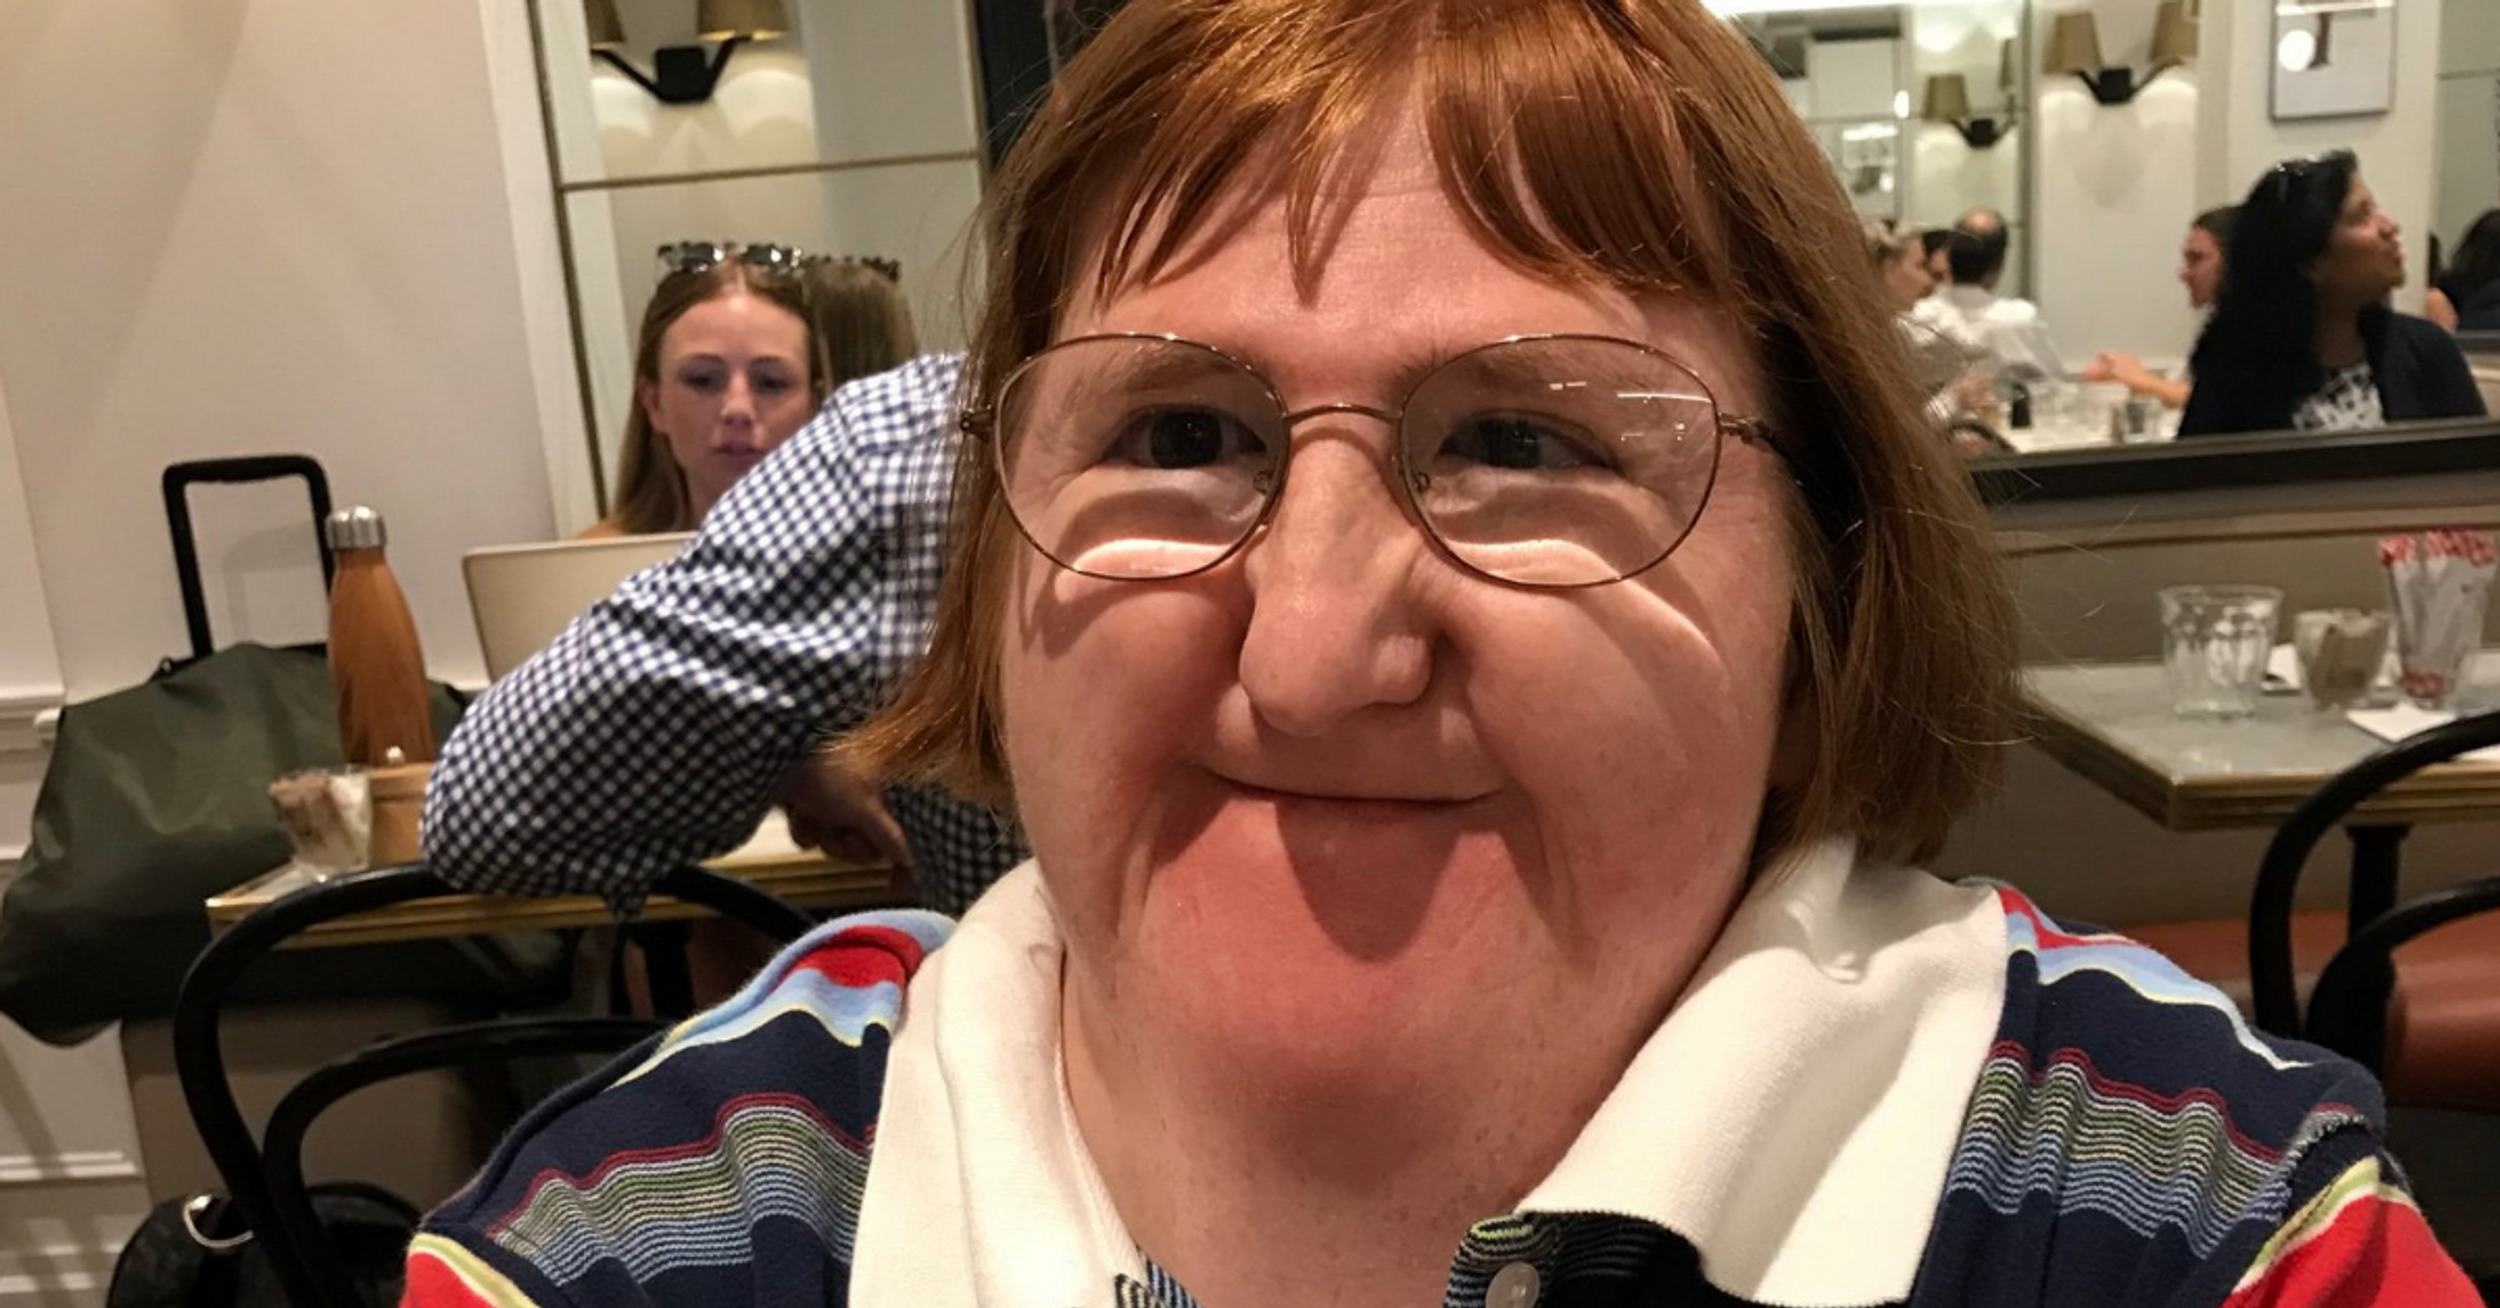 Disabled Writer Goes Viral After Combating Online Trolls' Mean Comments With Cheerful Selfies